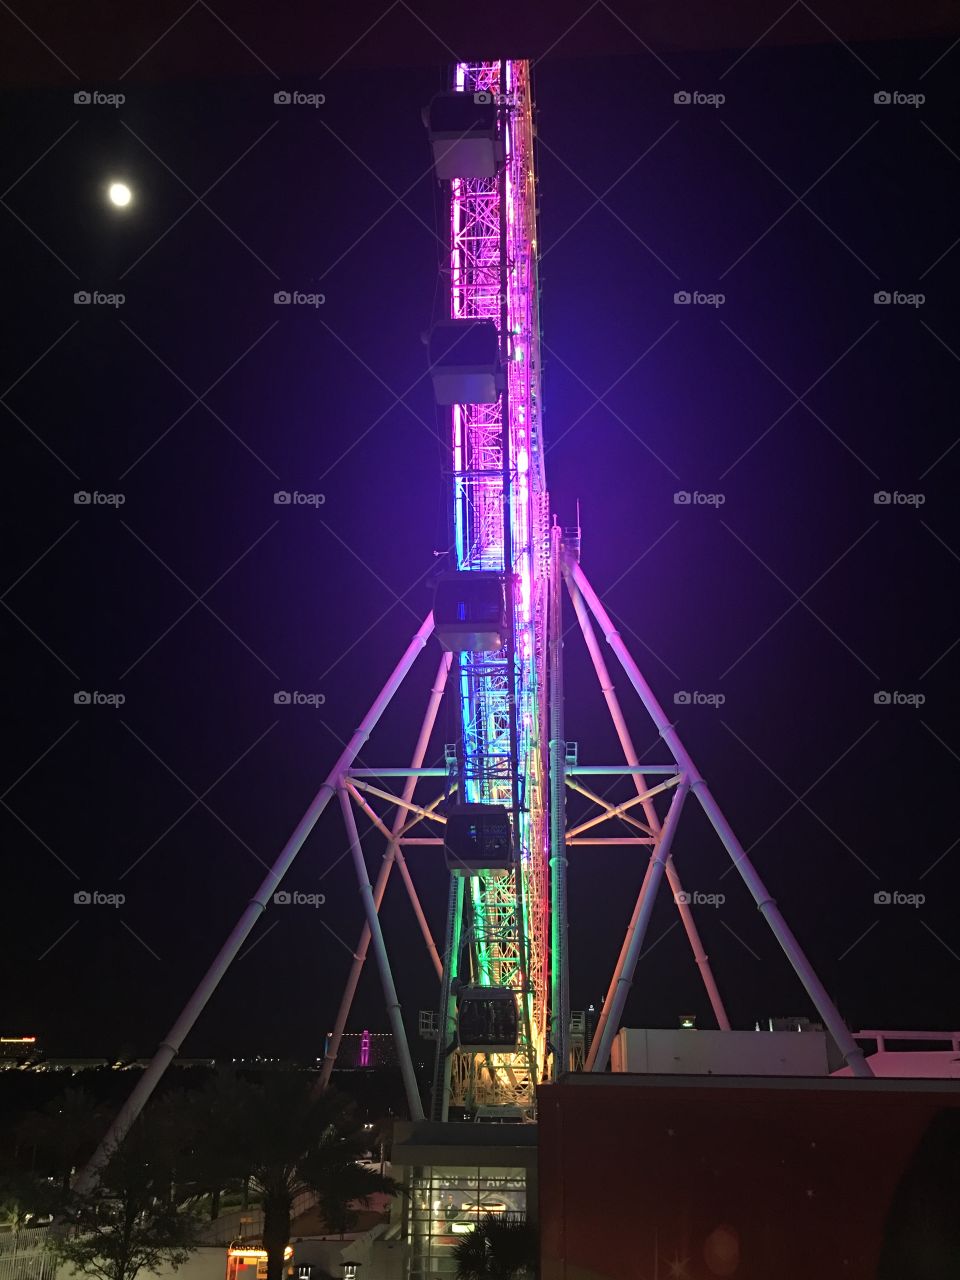 The Orlando Eye has changed its colors to rainbow.  In support of the Pulse Victims.  We embrace all walks of life in Orlando.  We will not allow hate to conquer our city.  The greatest place on earth.  